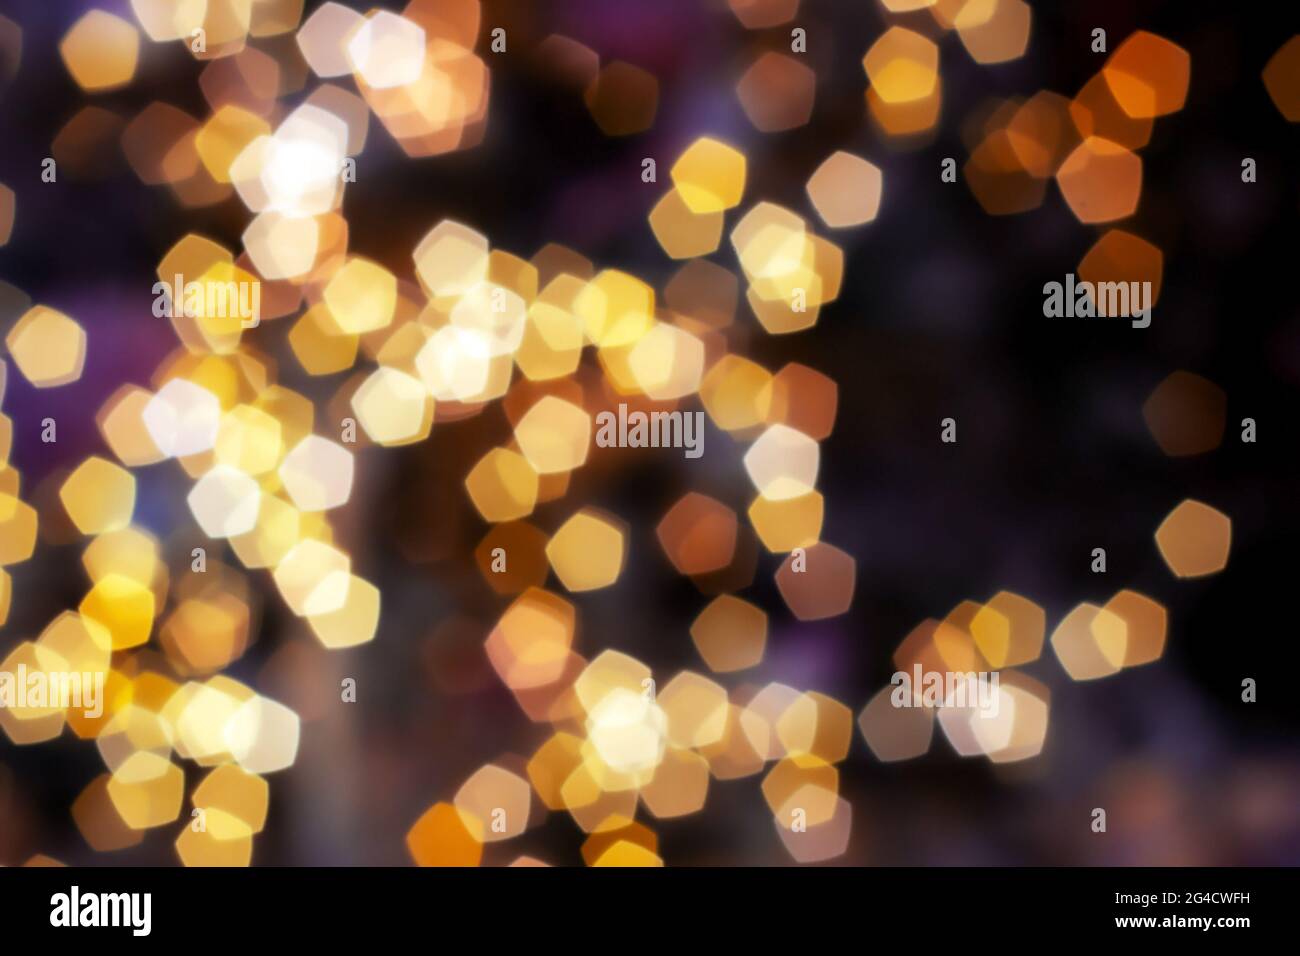 Blurred golden lights abstract background in the night, defocused dark glowing bokeh backdrop, magical yellow illuminated sparkle pattern. Stock Photo